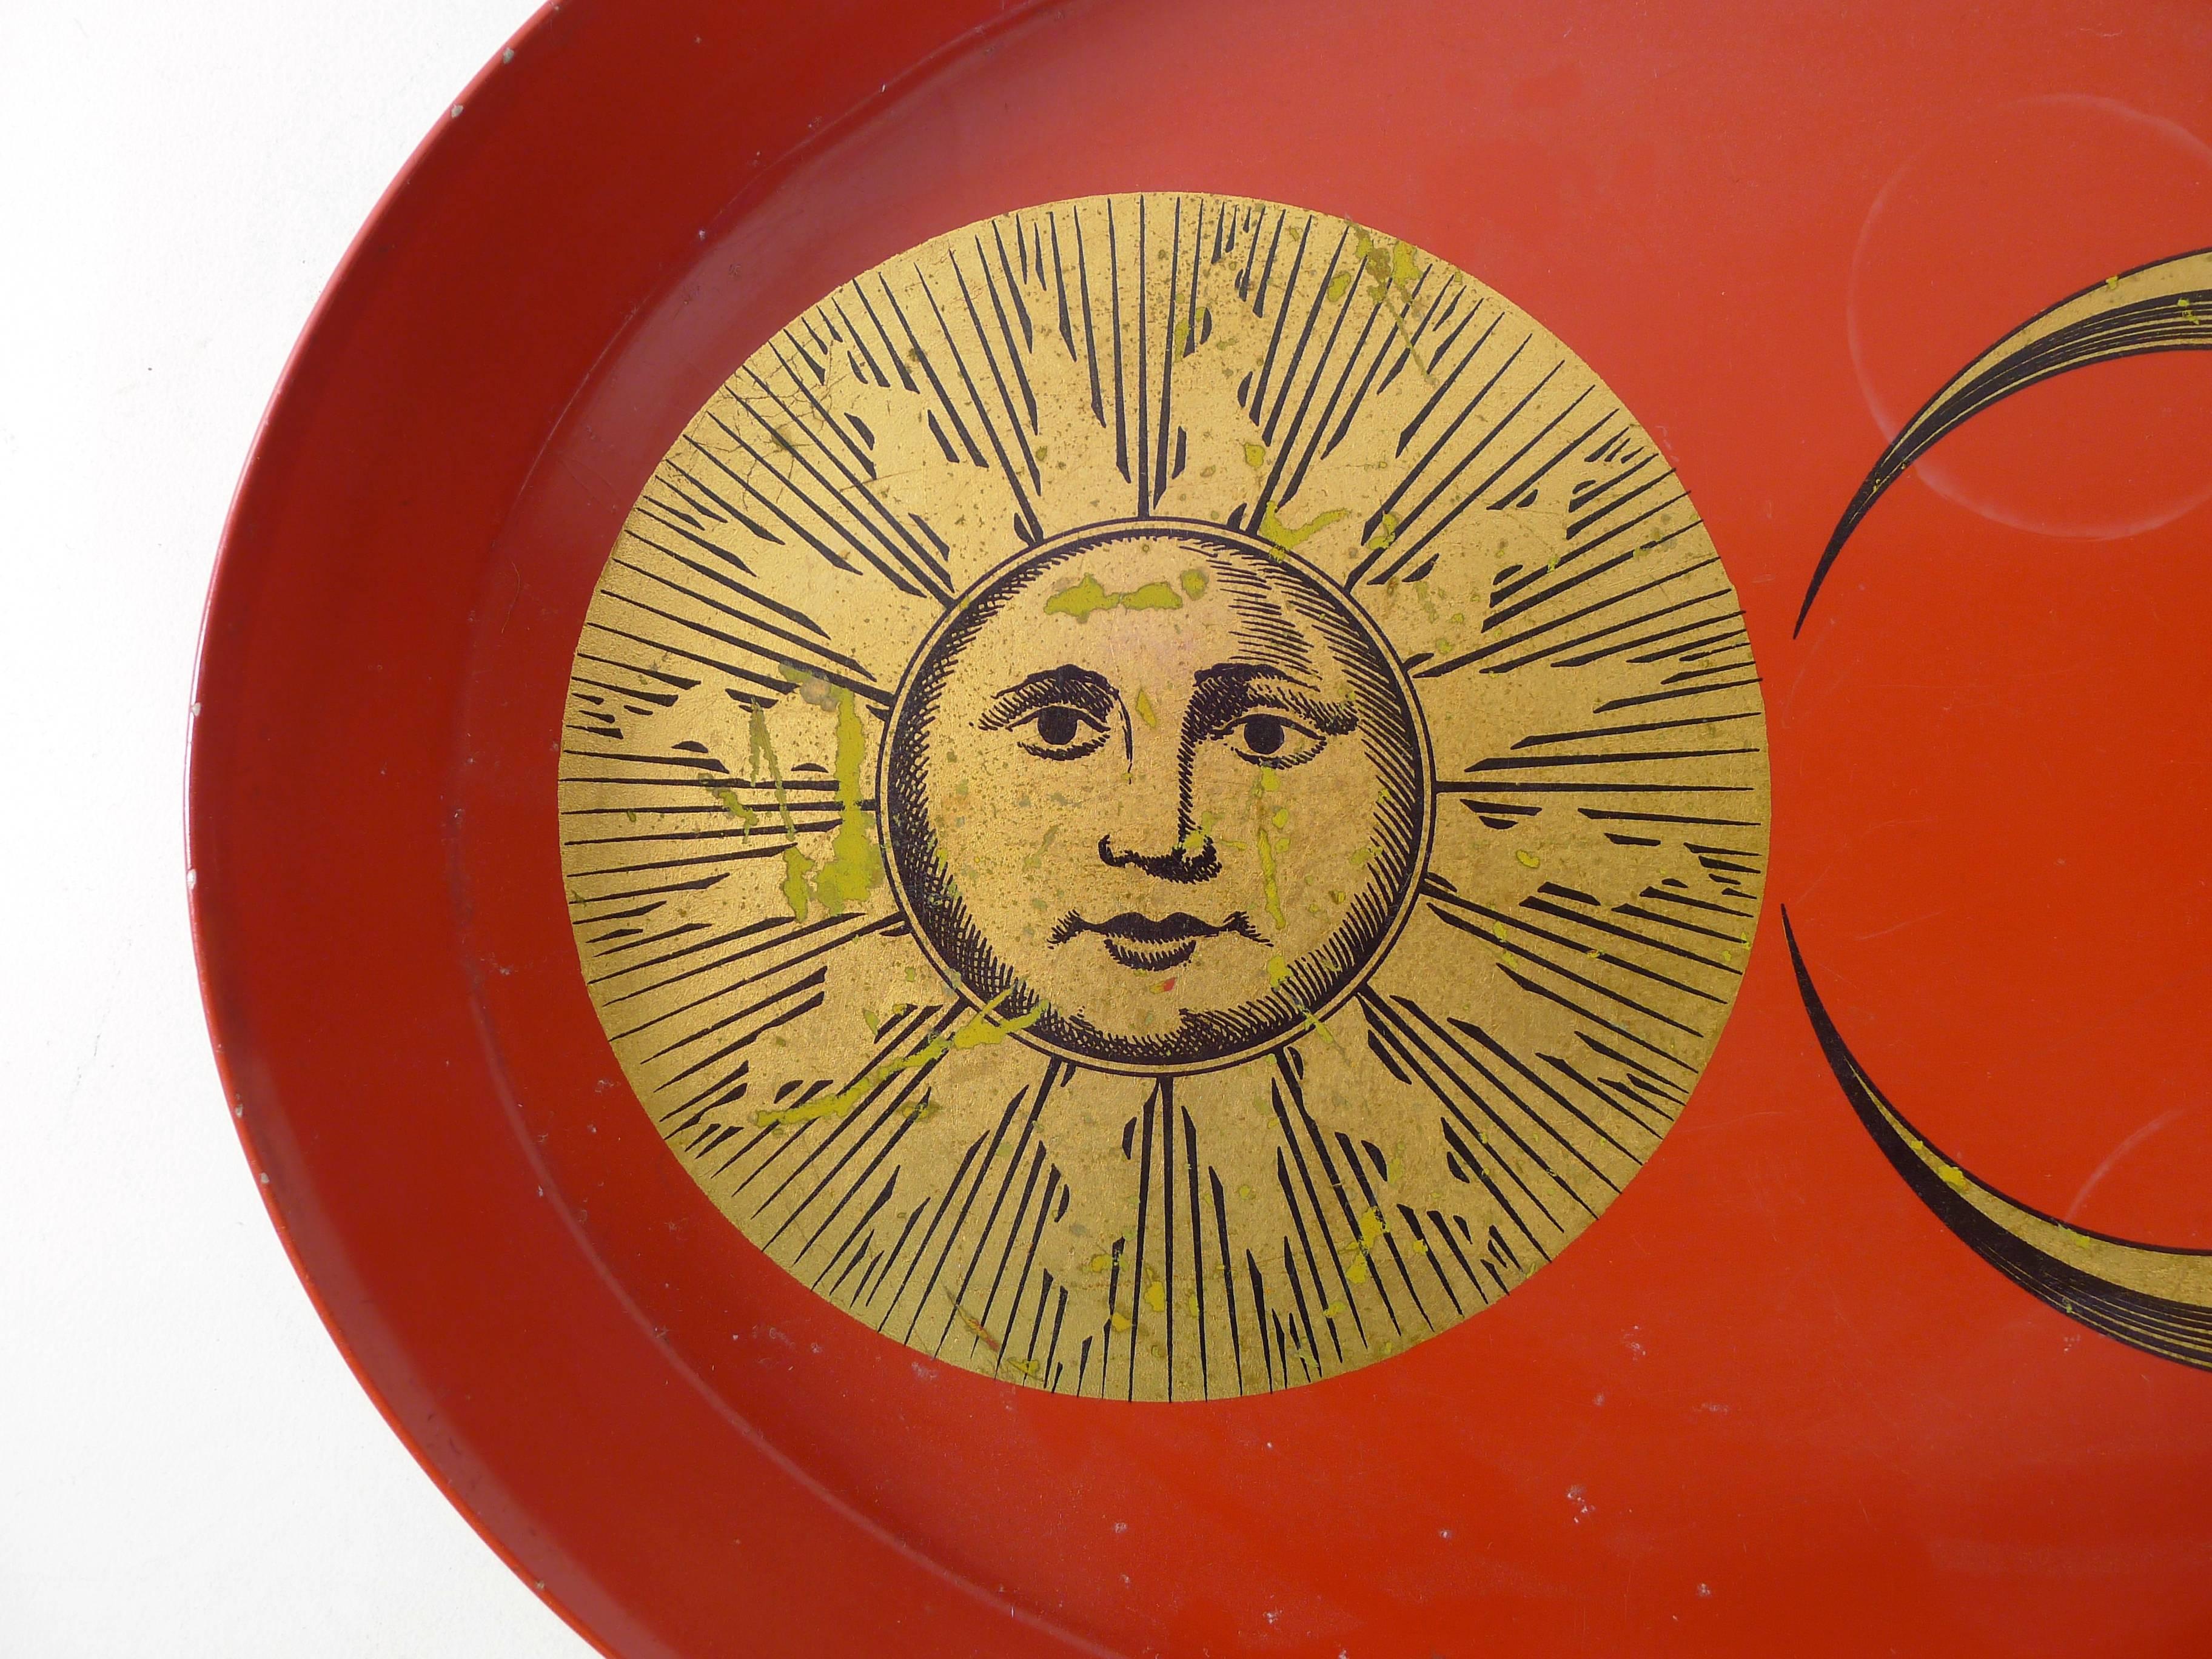 Piero Fornasetti serving tray, Italy, circa 1950s. Sun and moon motifs in gold on red background.
Images show age appropriate wear from use, label to the underside.